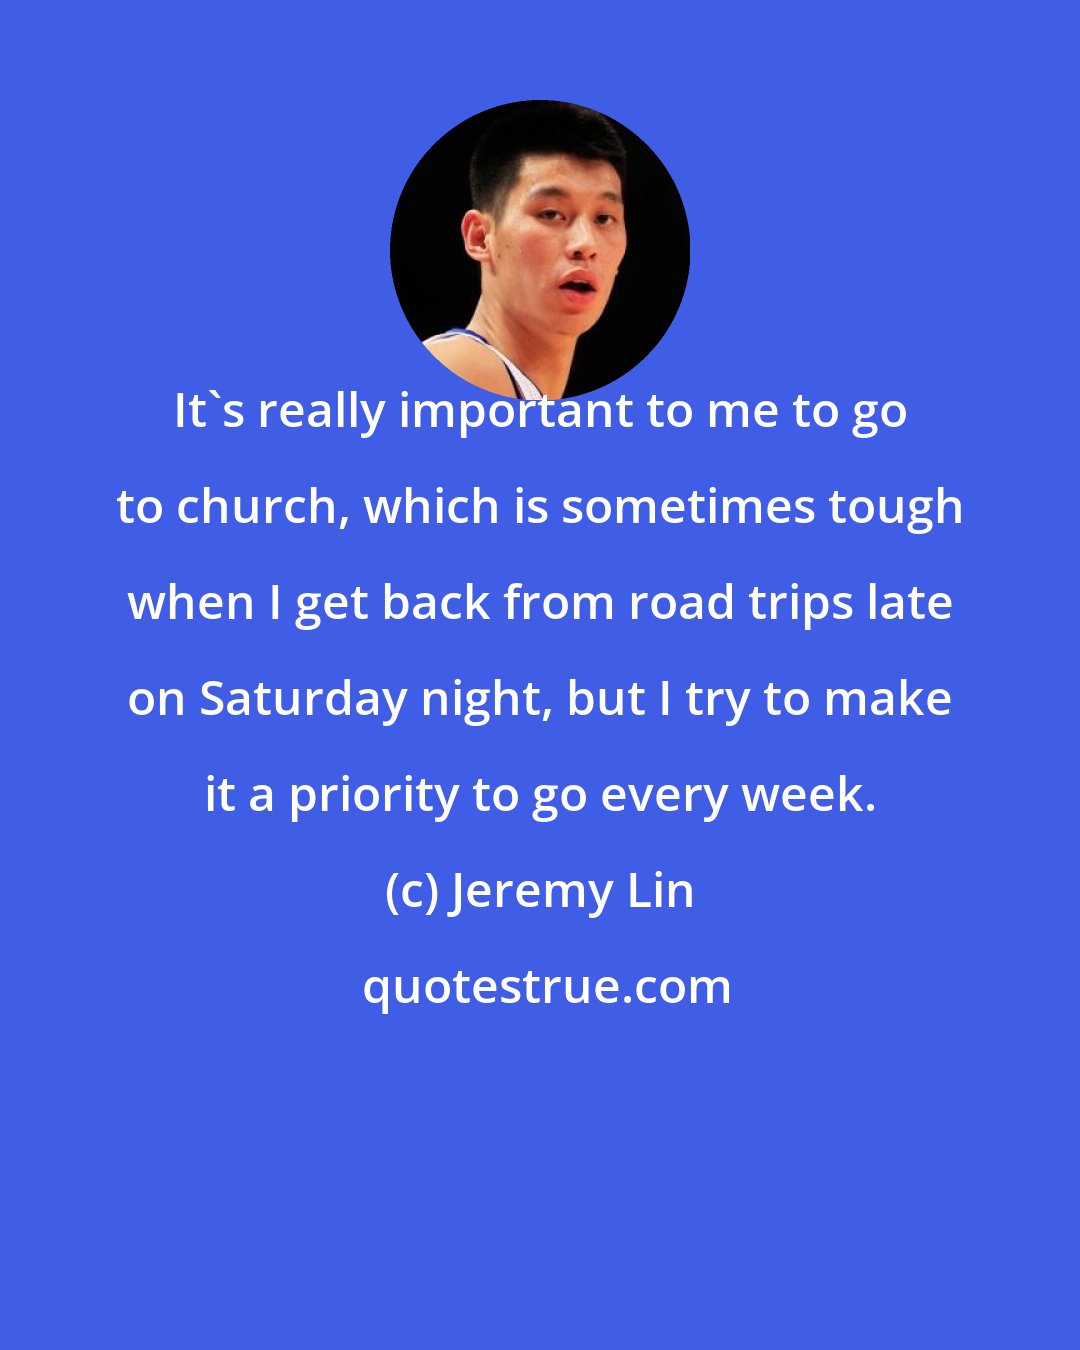 Jeremy Lin: It's really important to me to go to church, which is sometimes tough when I get back from road trips late on Saturday night, but I try to make it a priority to go every week.